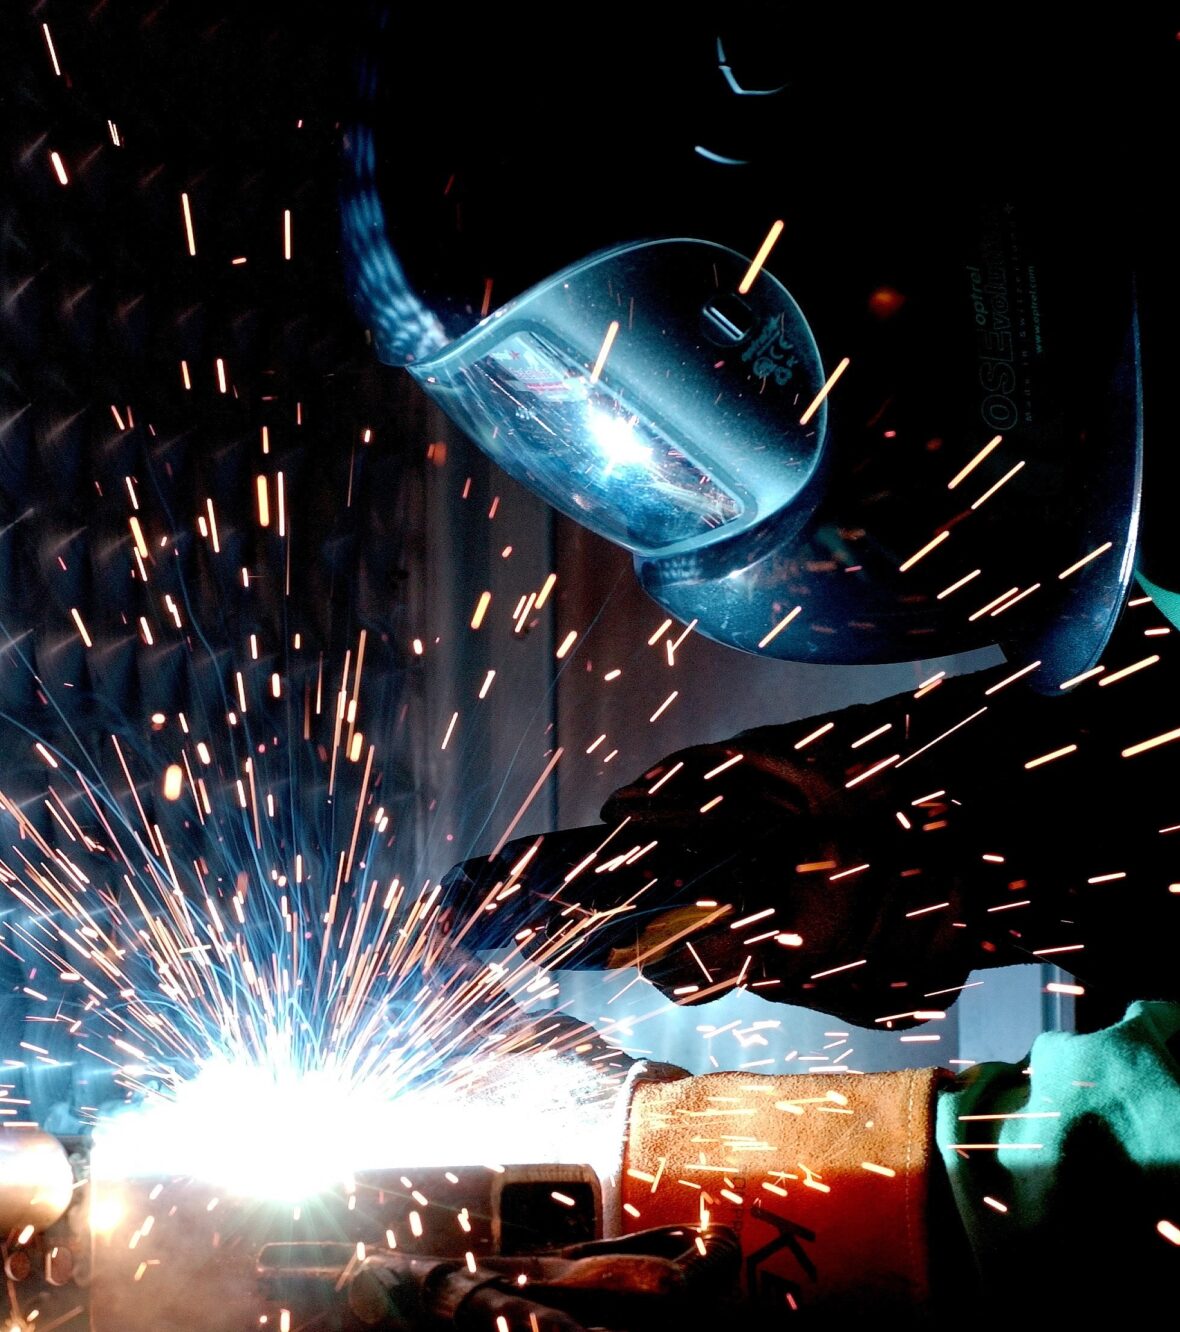 Smart tech takes on the liquid-steel manufacturing challenge